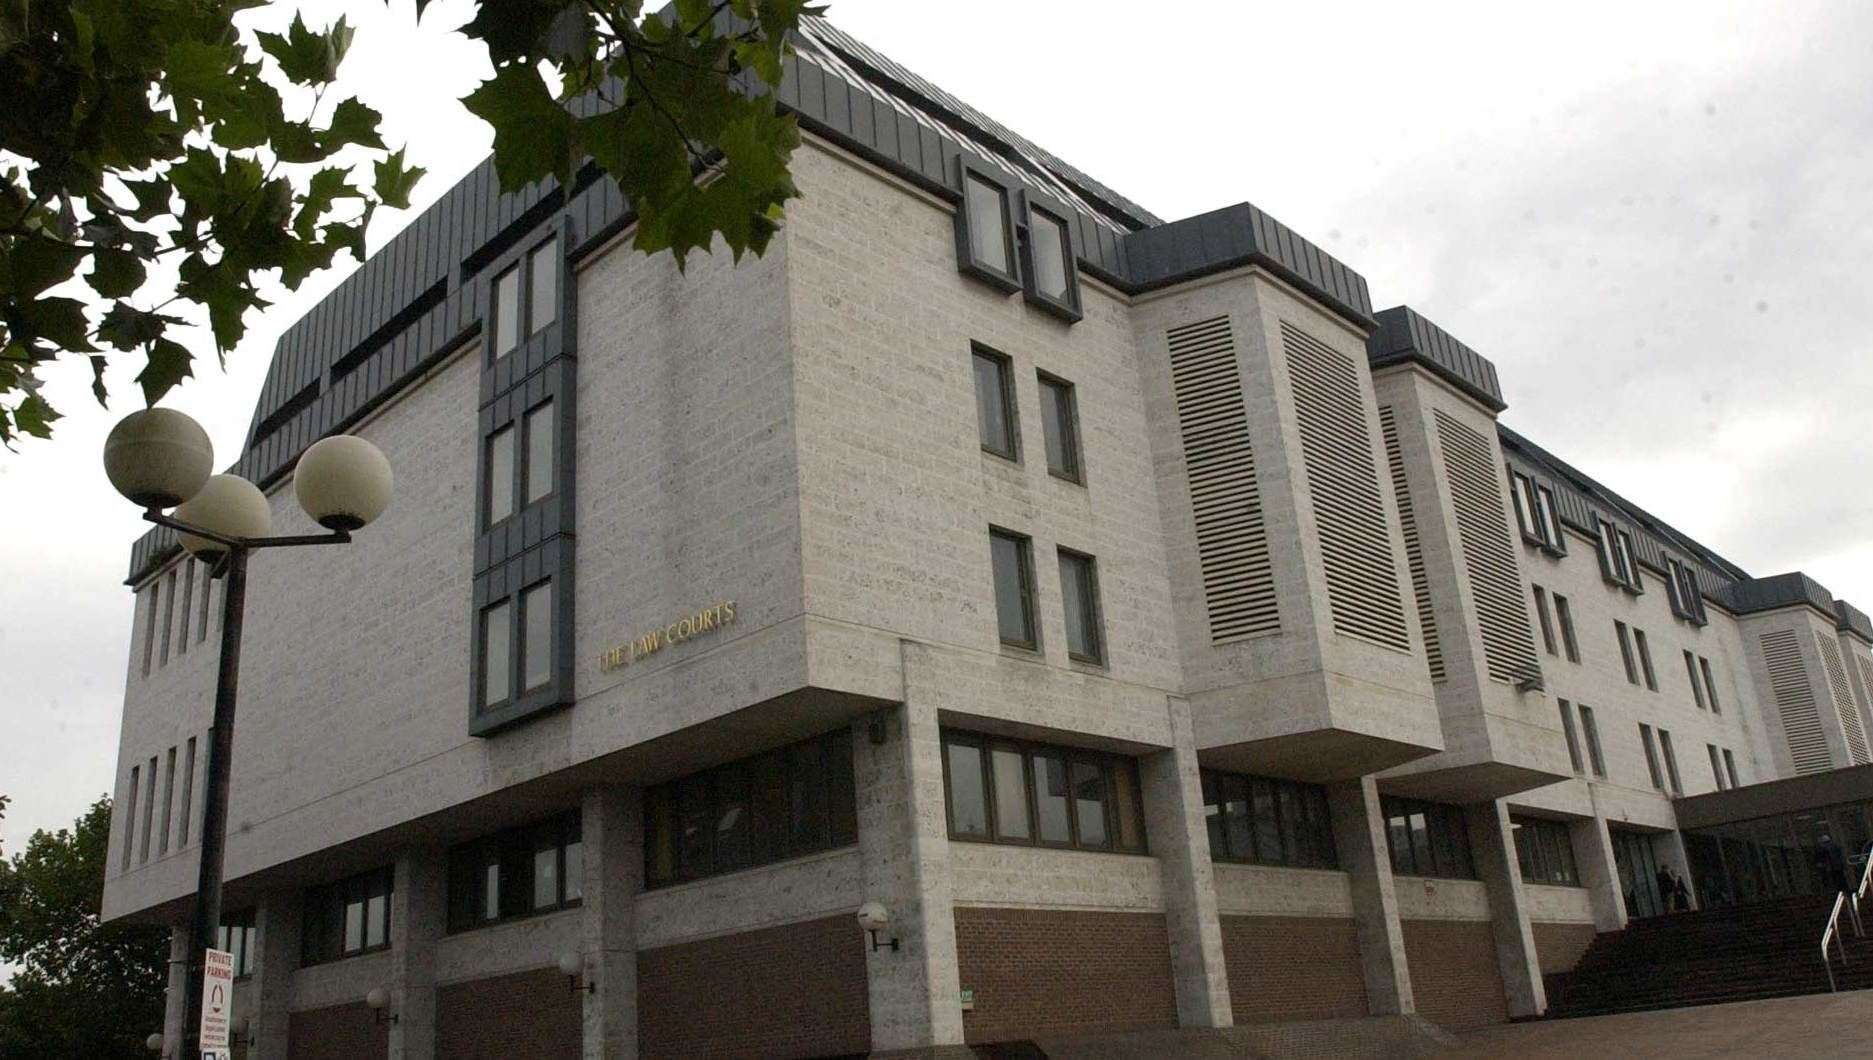 Maidstone Crown Court is set to be extended as part of the plans